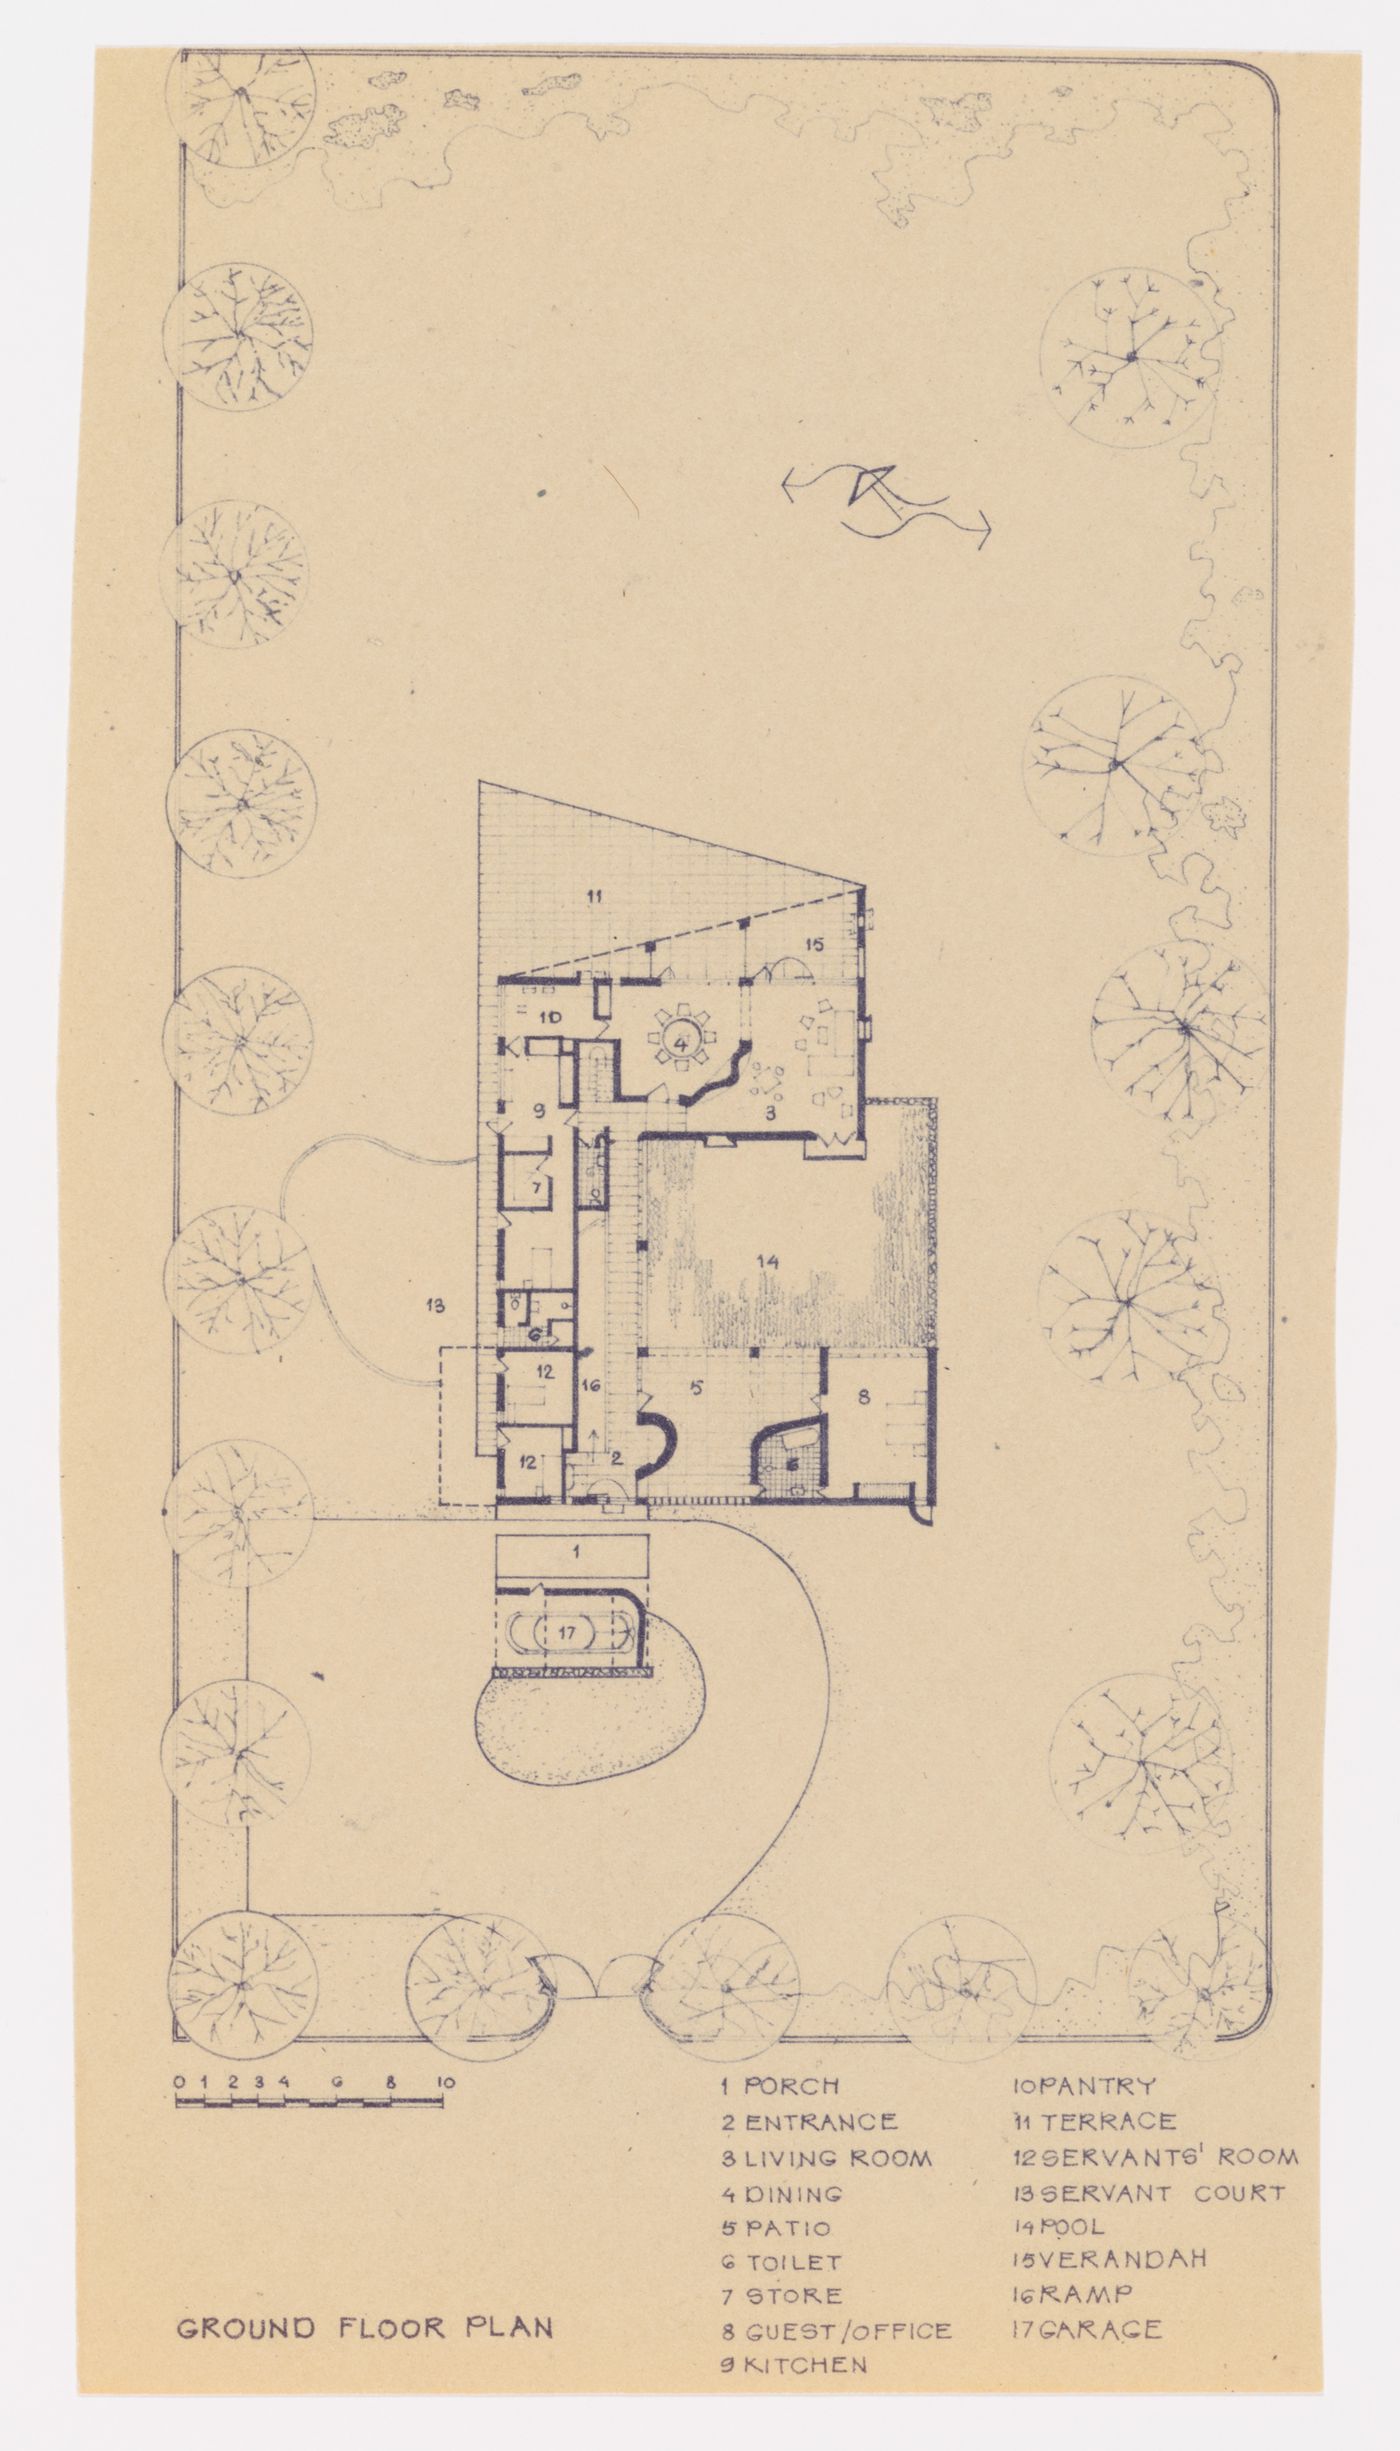 Floor plan for the Gautam Segal's House in sector 5 in Chandigarh, India